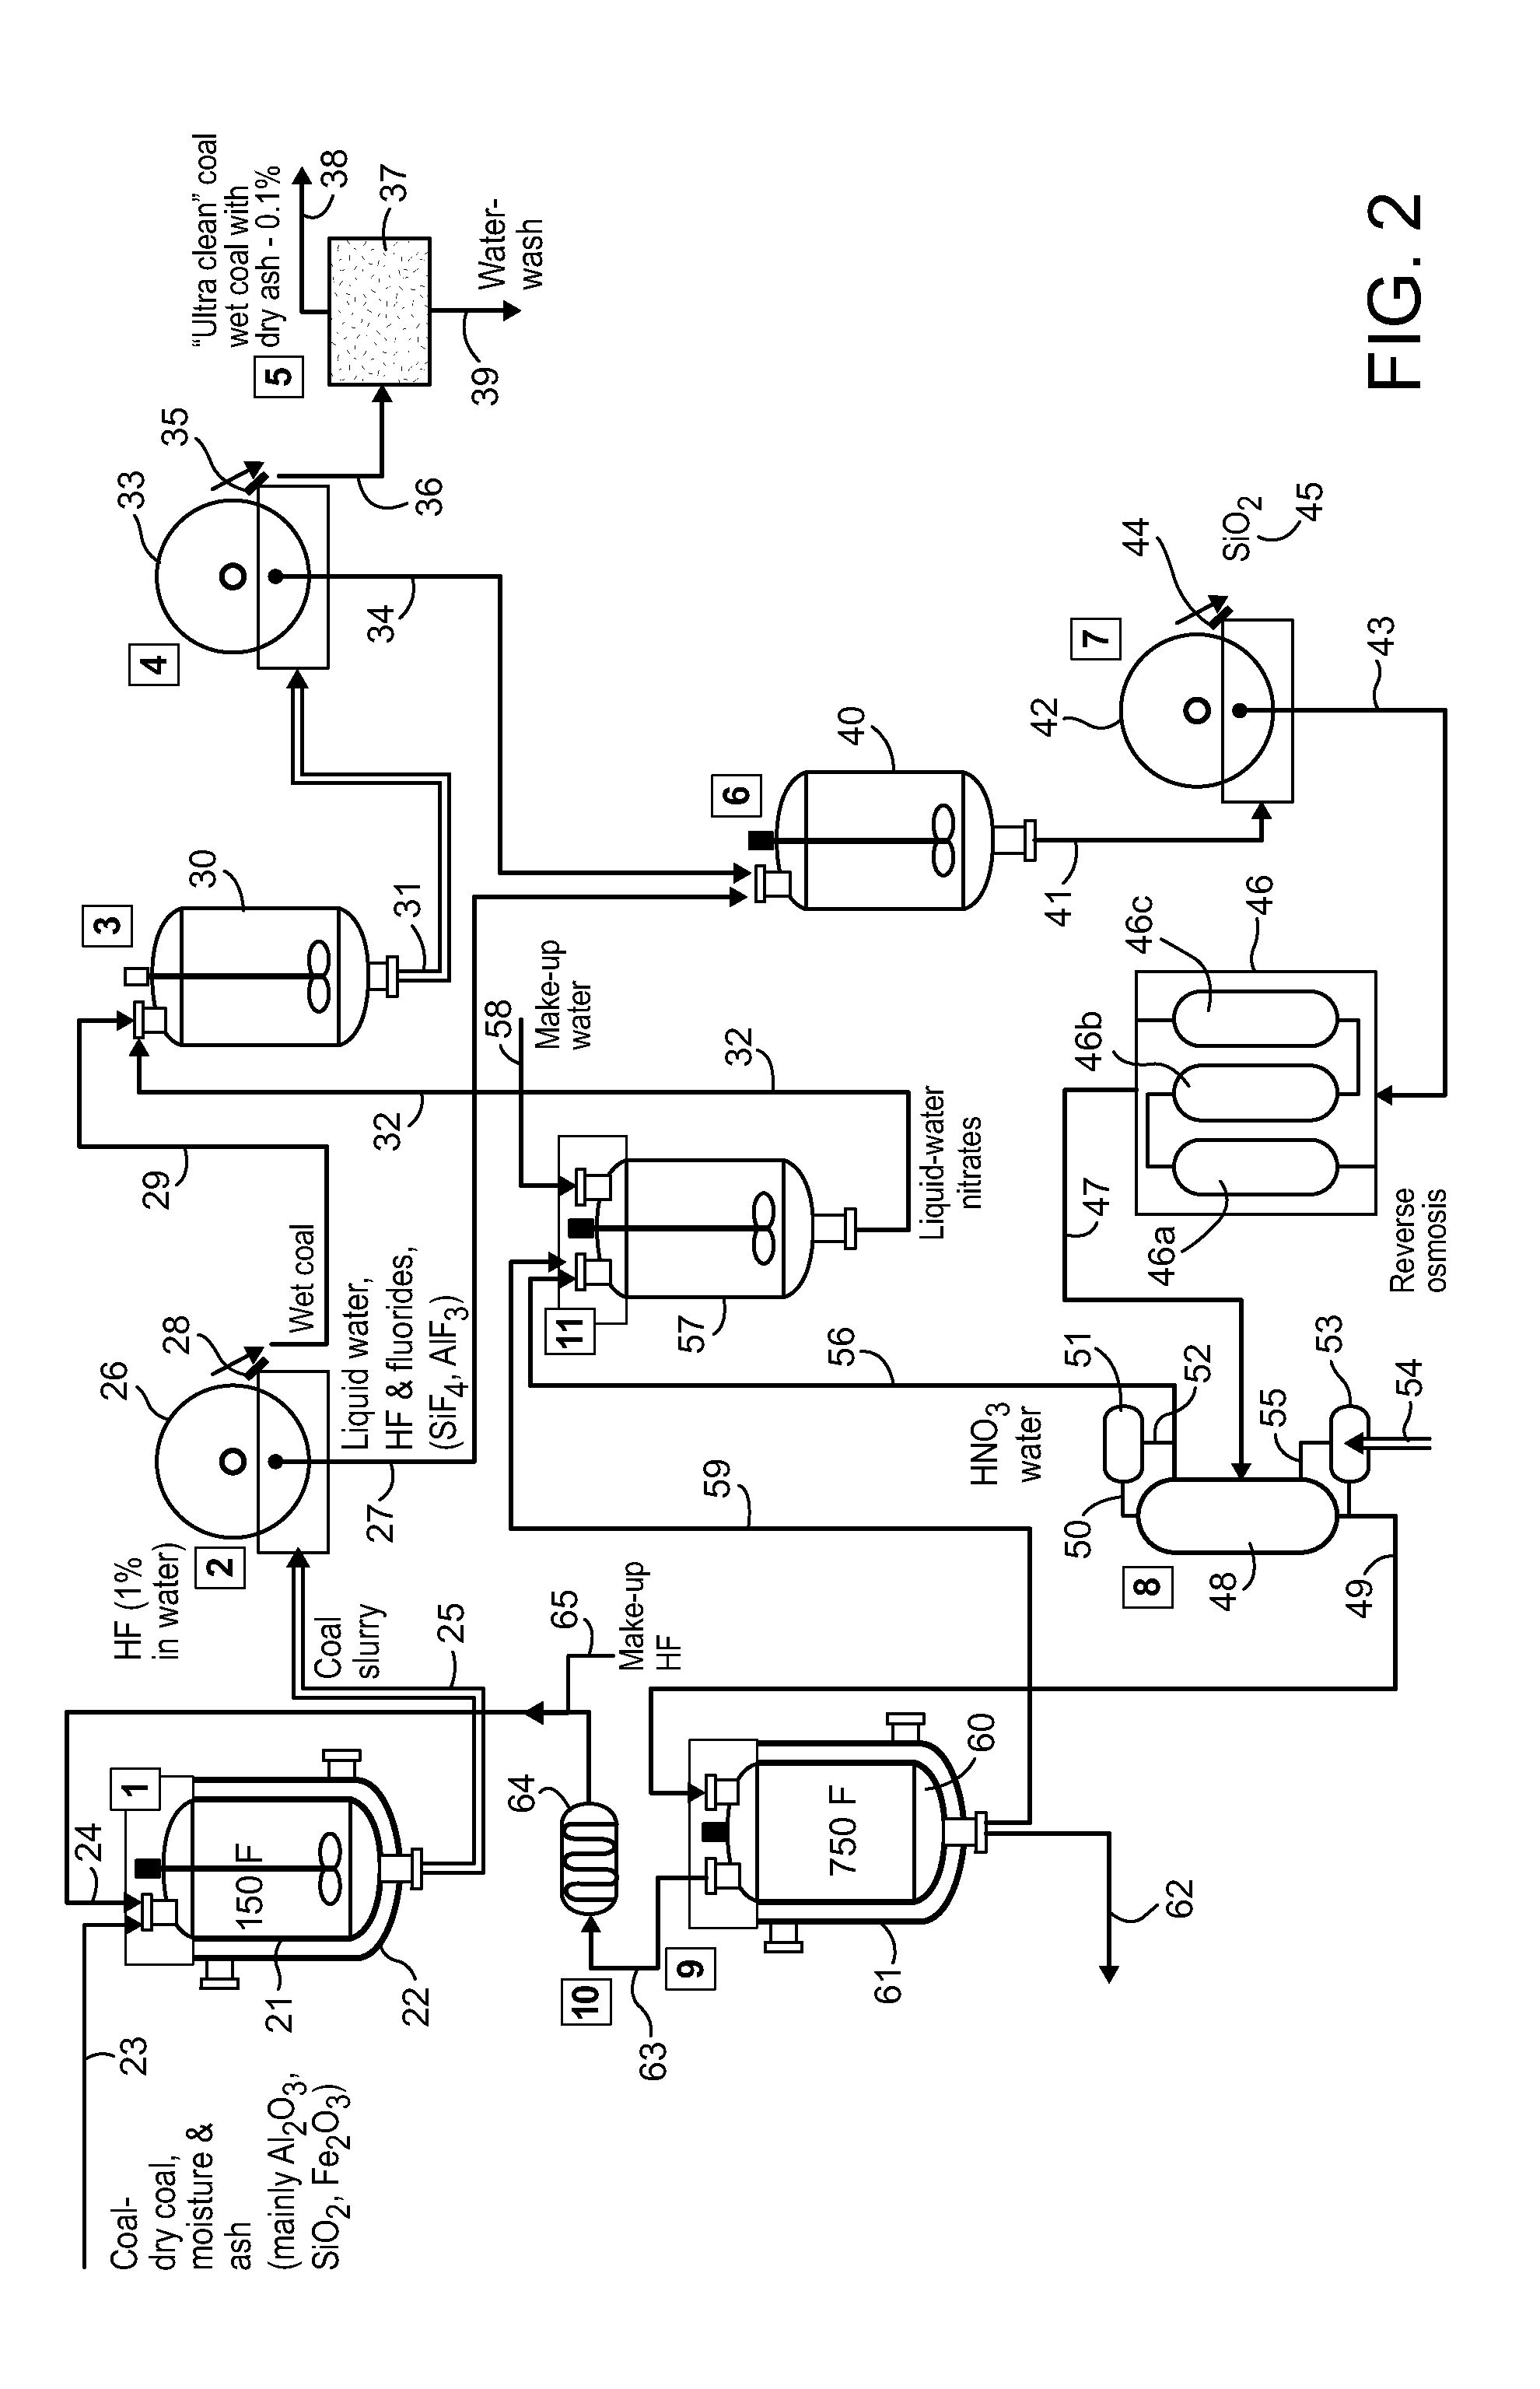 Process for obtaining treated coal and silica from coal containing fly ash